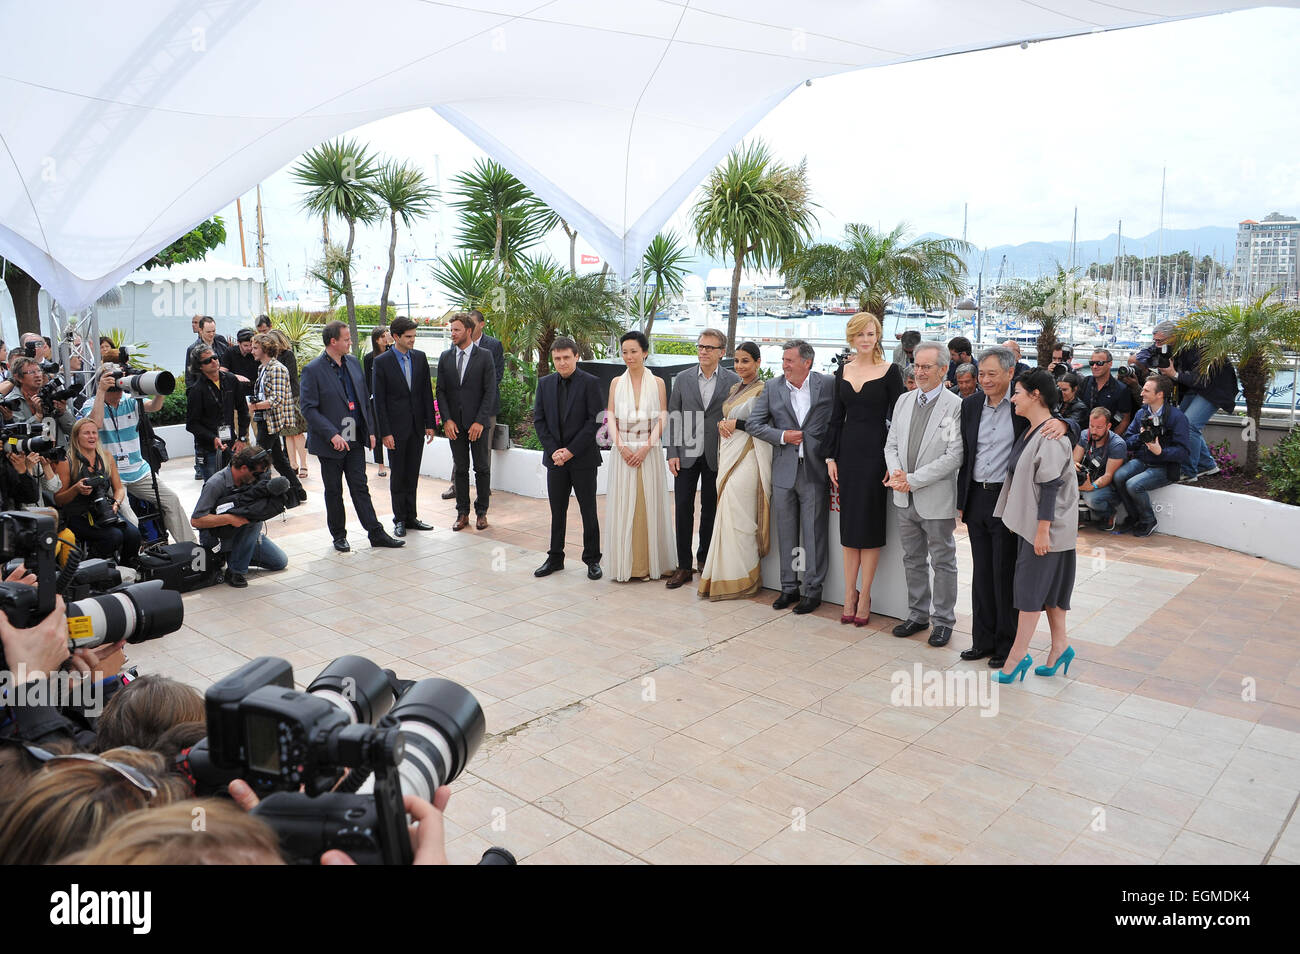 CANNES, FRANCE - MAY 15, 2013: Cannes Jury President Steven Spielberg with fellow jurors Nicole Kidman, Ang Lee, Daniel Auteuil, Christoph Waltz, Vidya Balan, Naomi Kawase, Lynne Ramsay & Cristian Mungiu at the photocall for the Jury of the 66th Festival de Cannes. Stock Photo